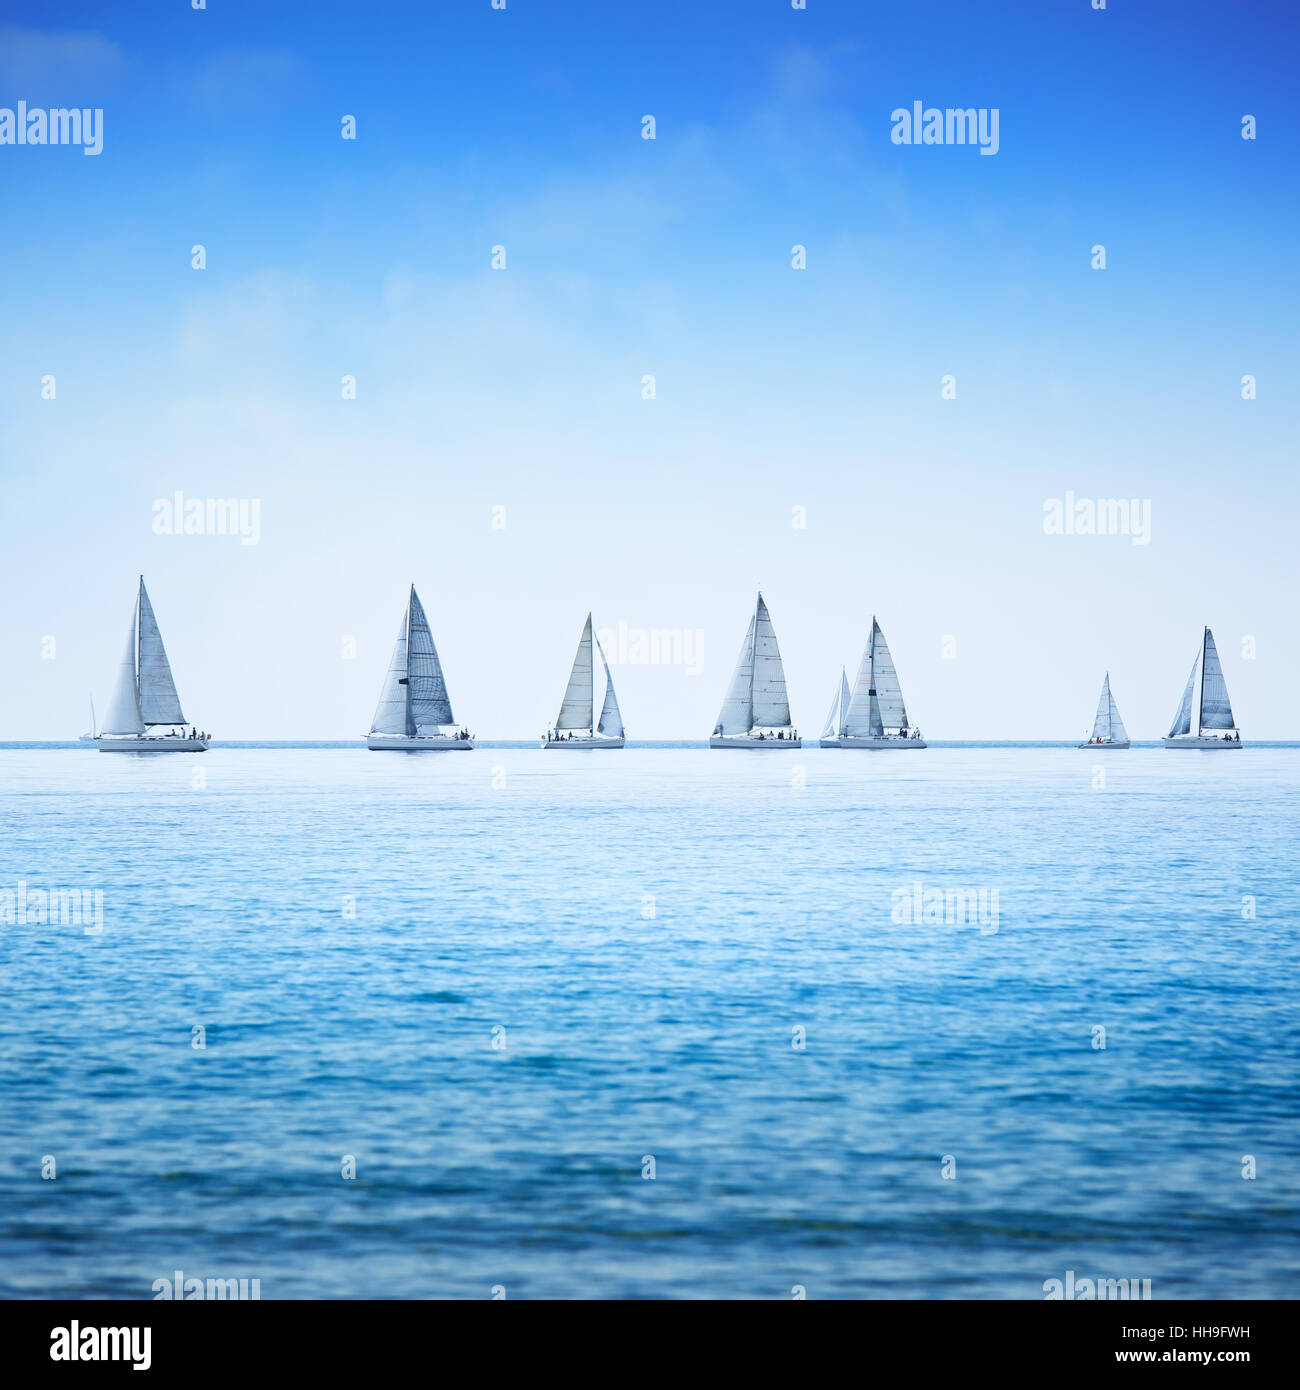 Sailing boat yacht or sailboat group regatta race on sea or ocean water. Stock Photo